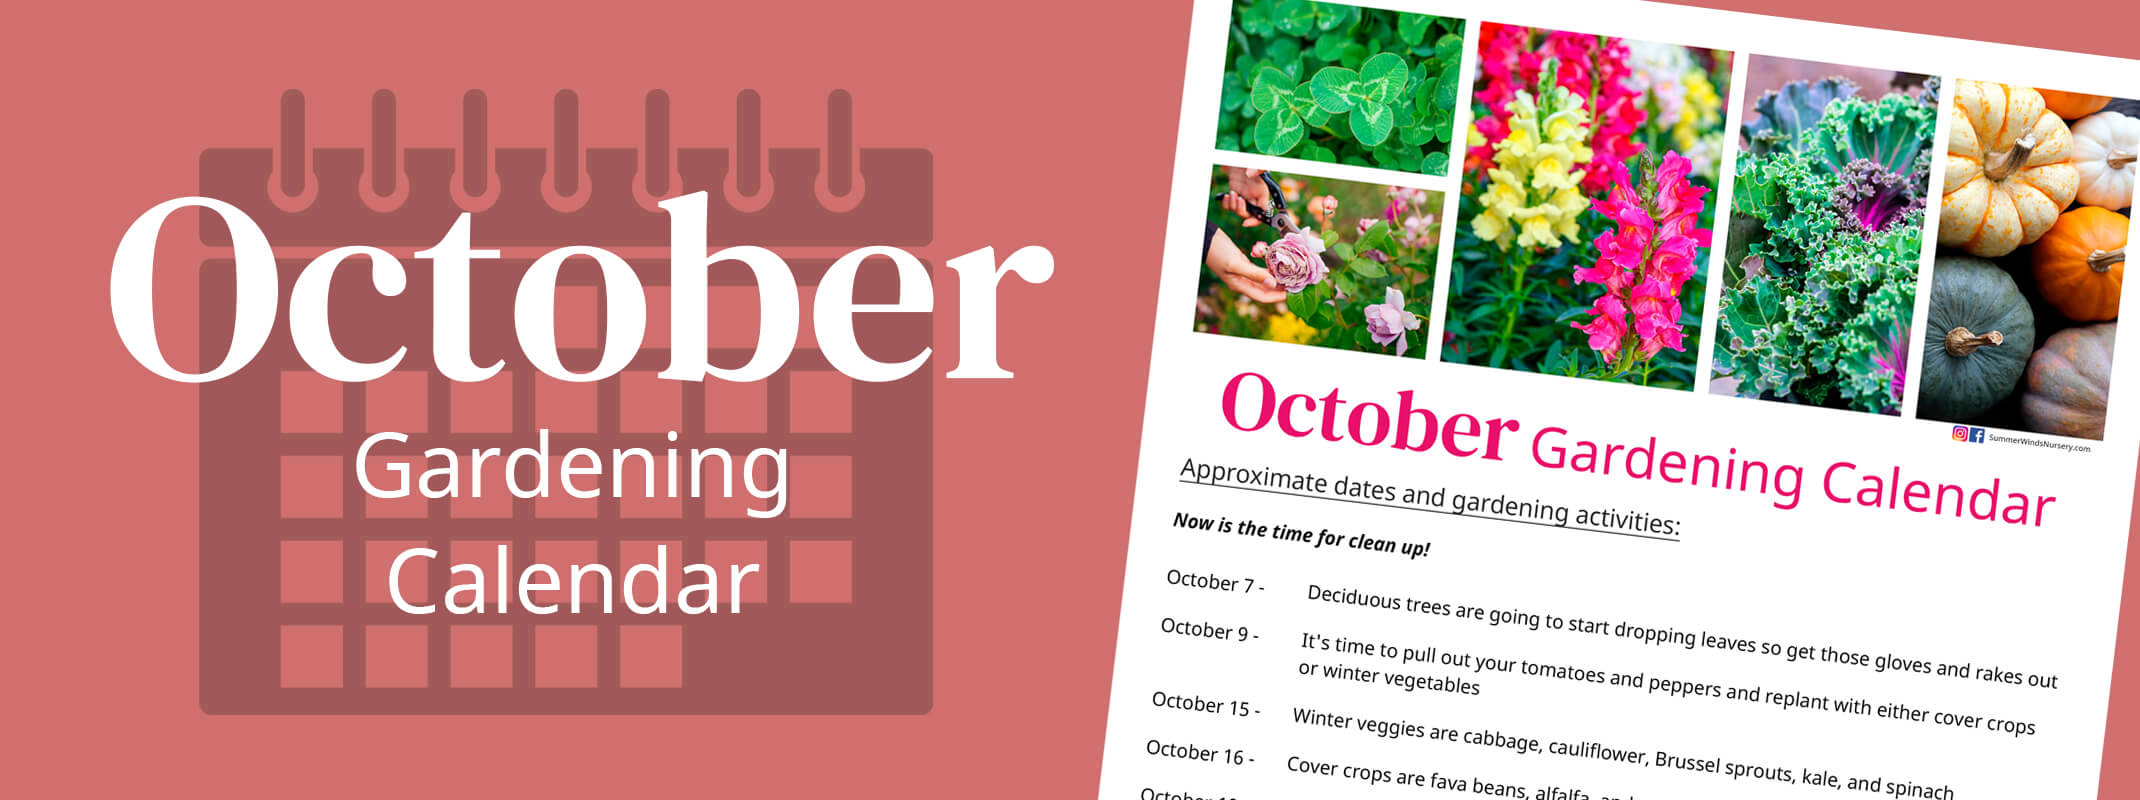 october gardening calendar with tips and images